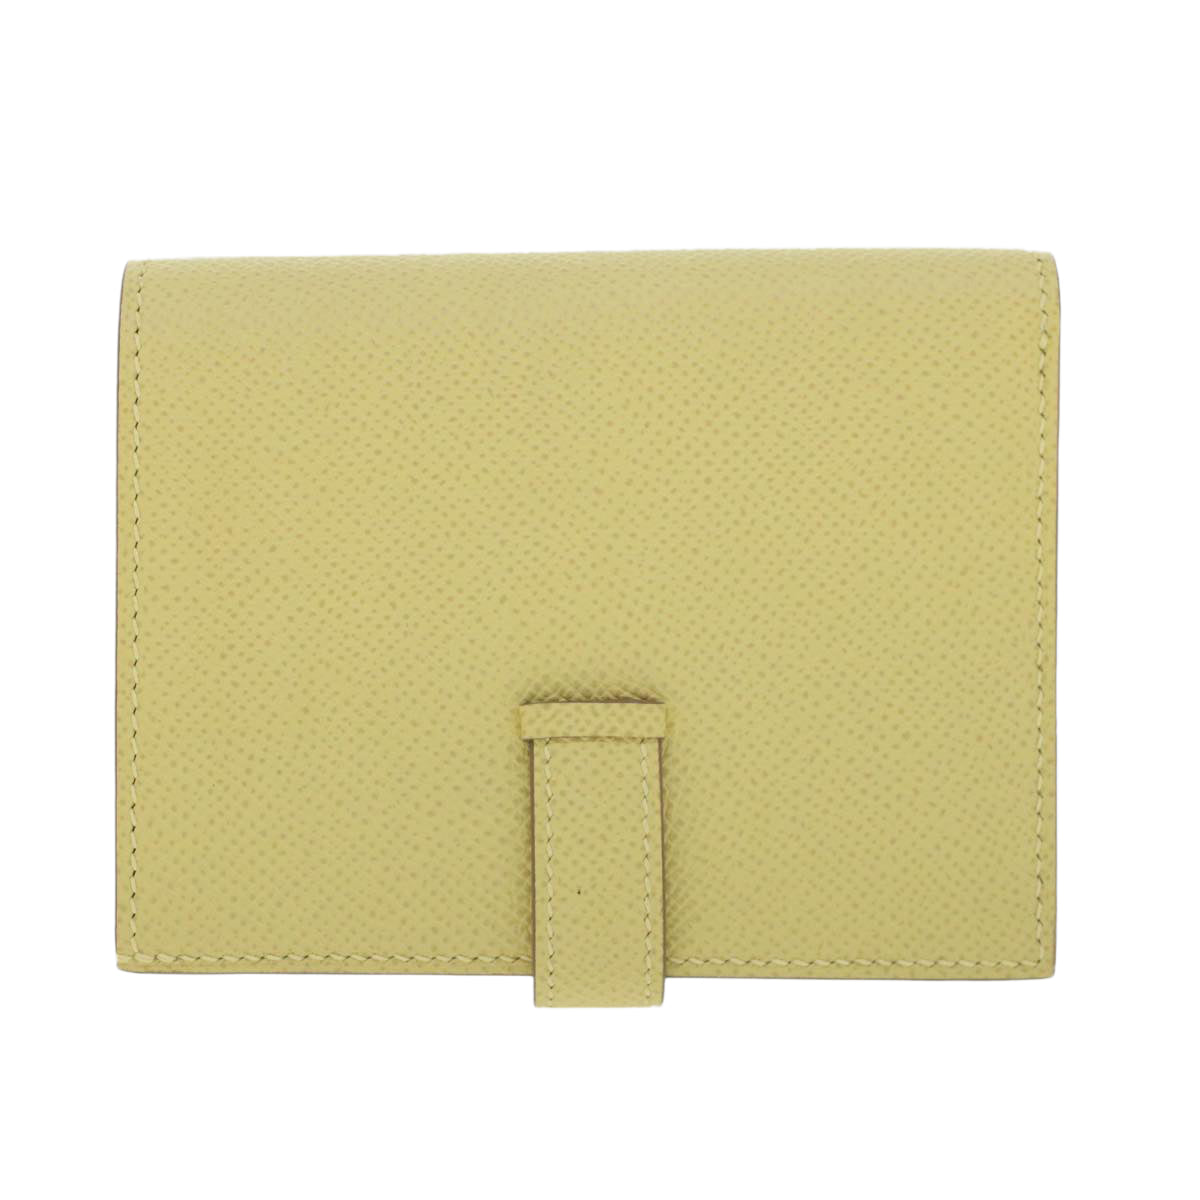 HERMES Bearn Compact Wallet Epsom Yellow Auth 45049A - 0